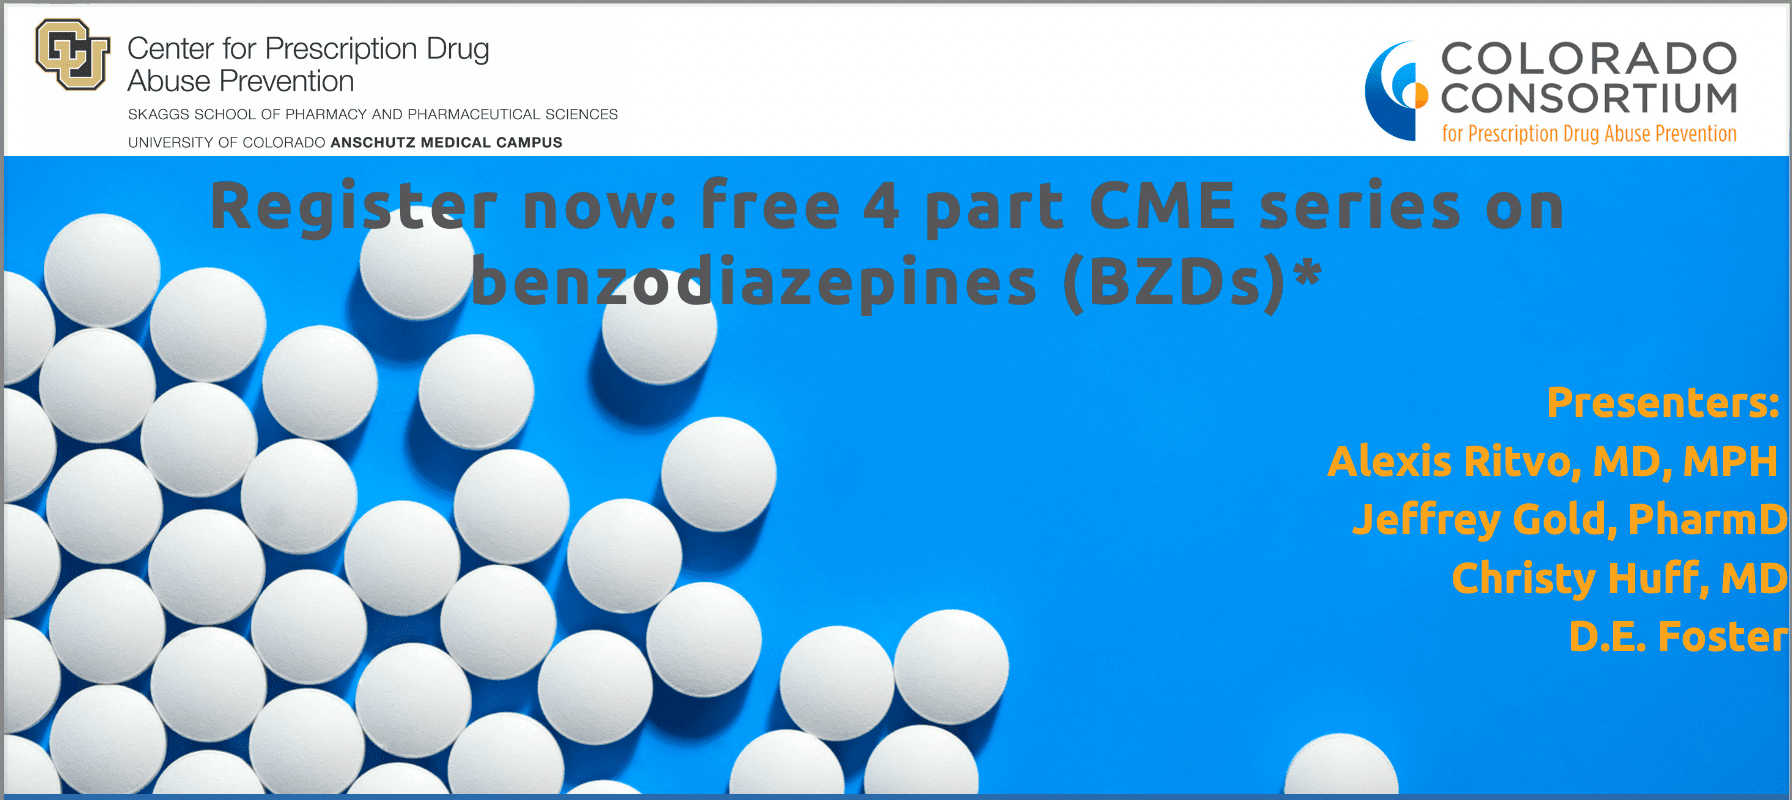 Benzodiazepine-focused webinar series, sponsored by the Consortium’s Benzodiazepine Action Work Group